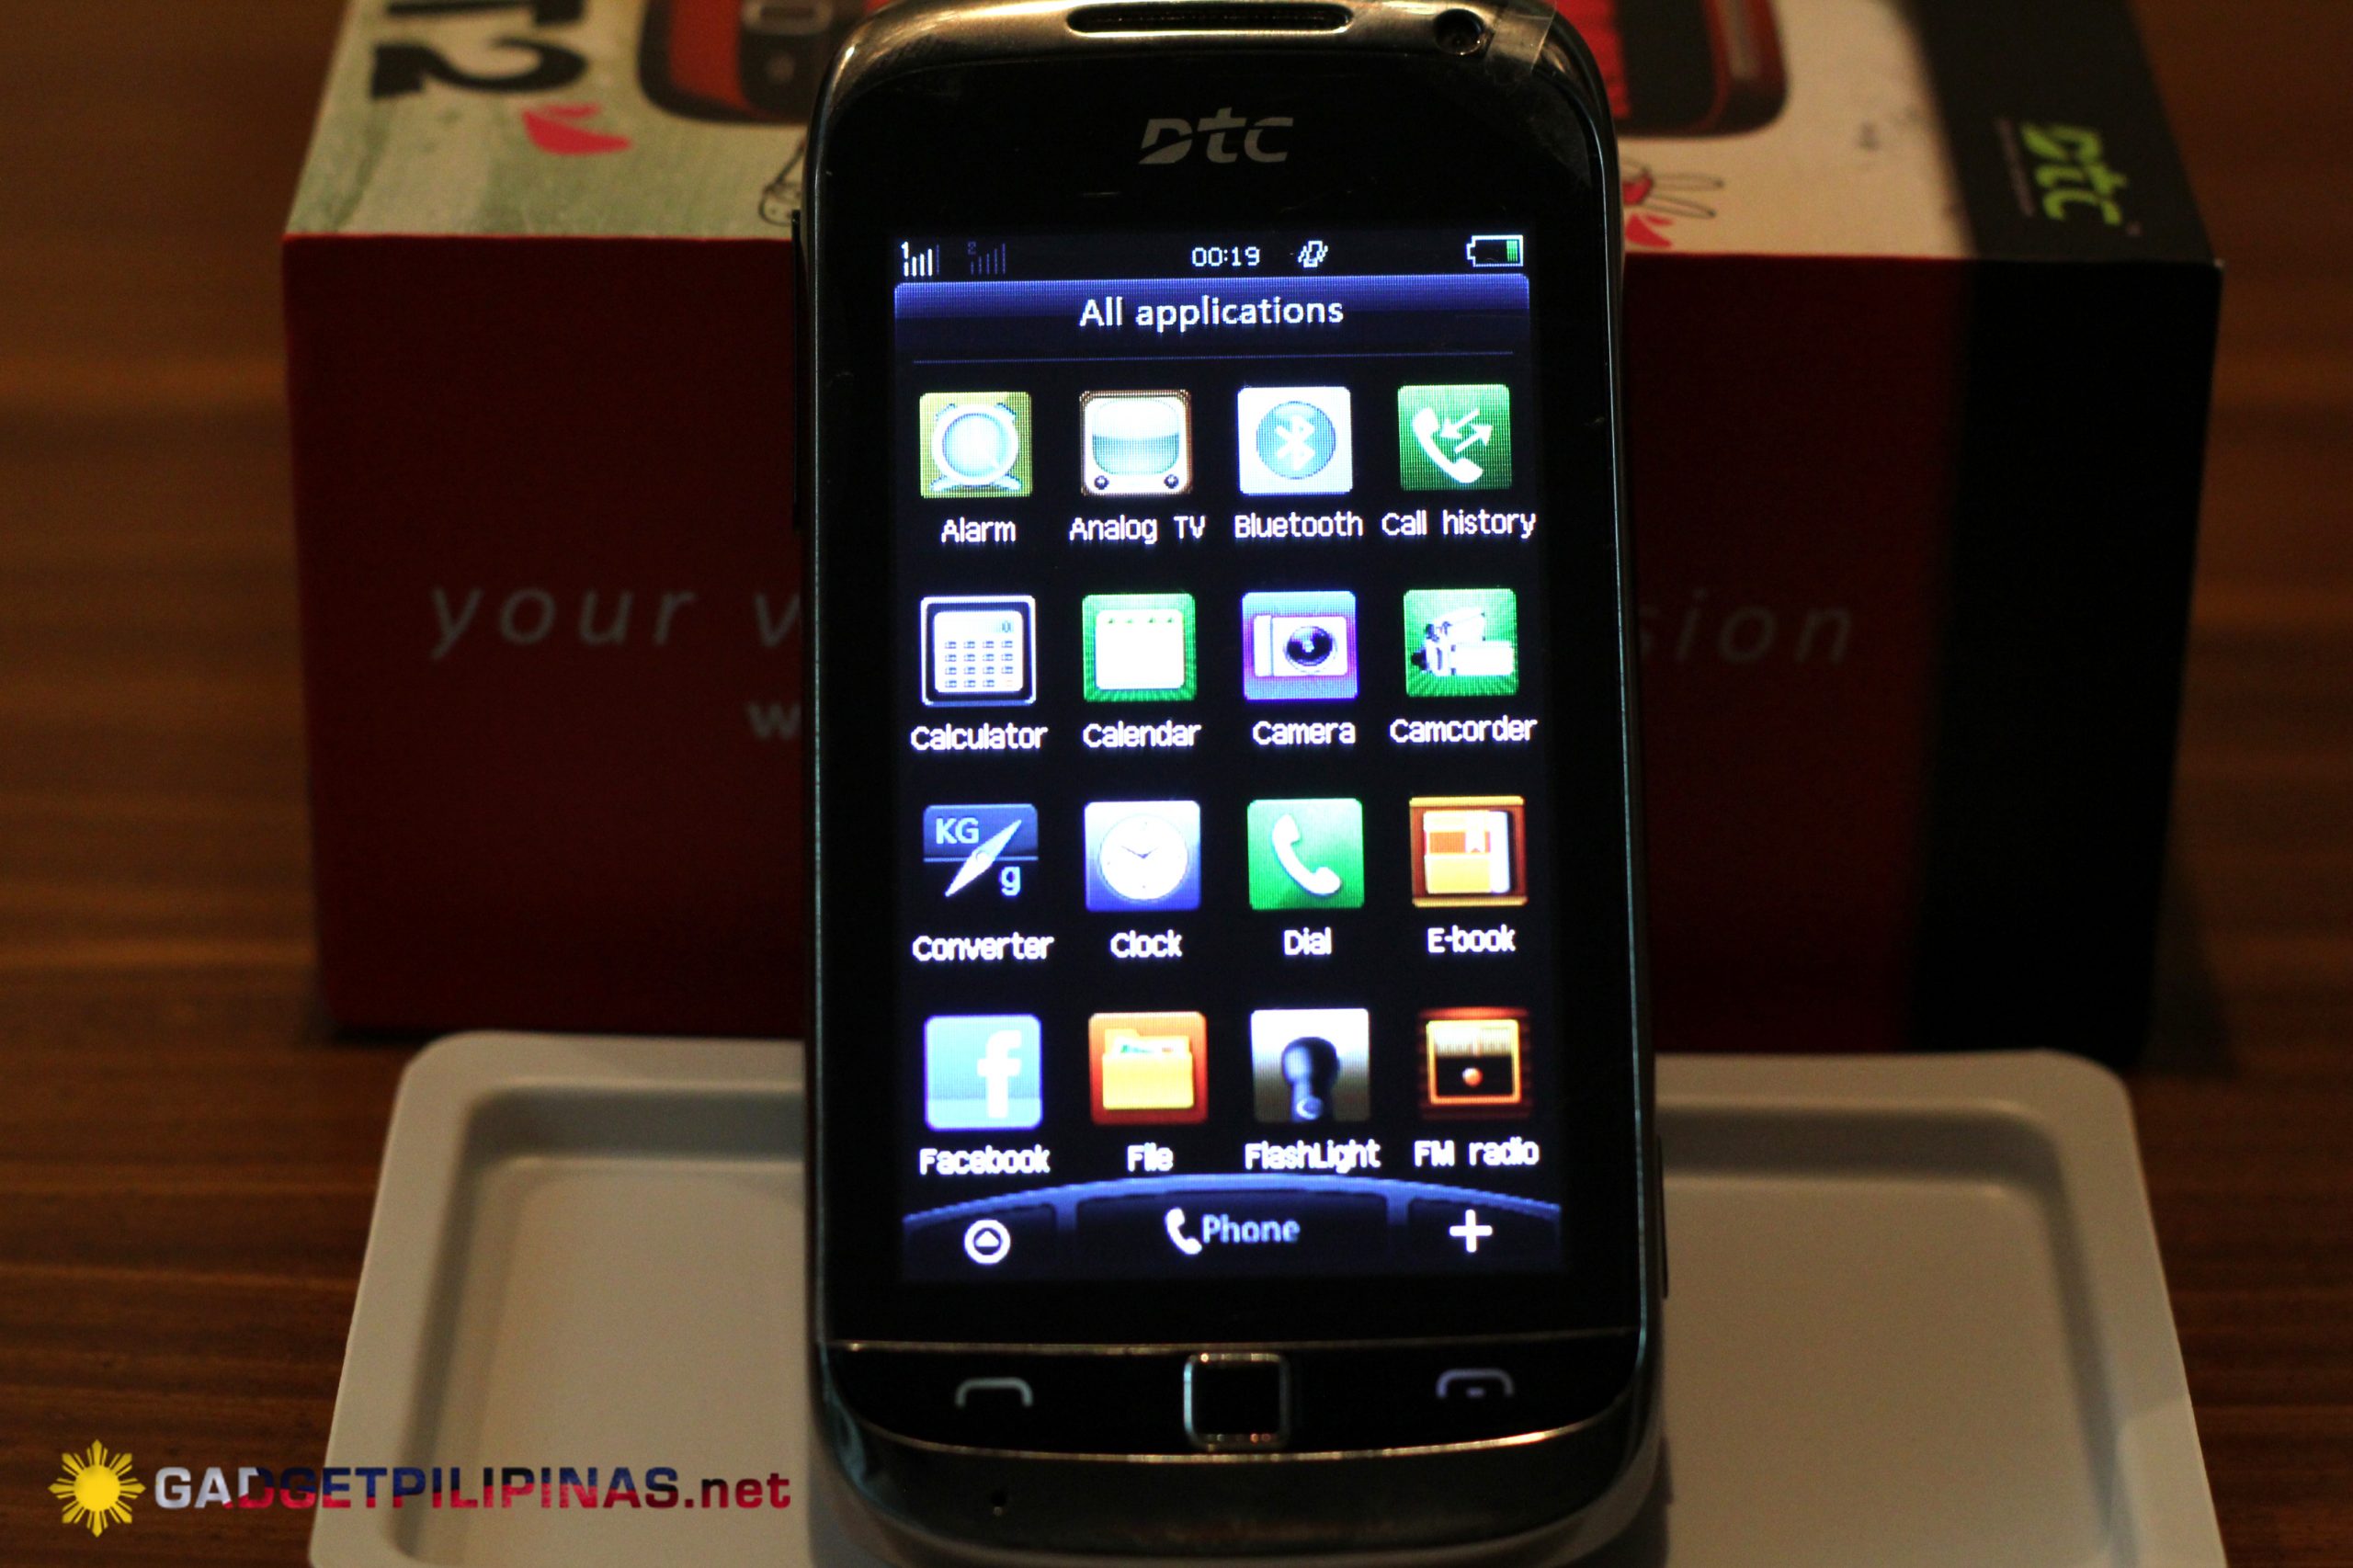 DTC GT2 Mobile Phone Review